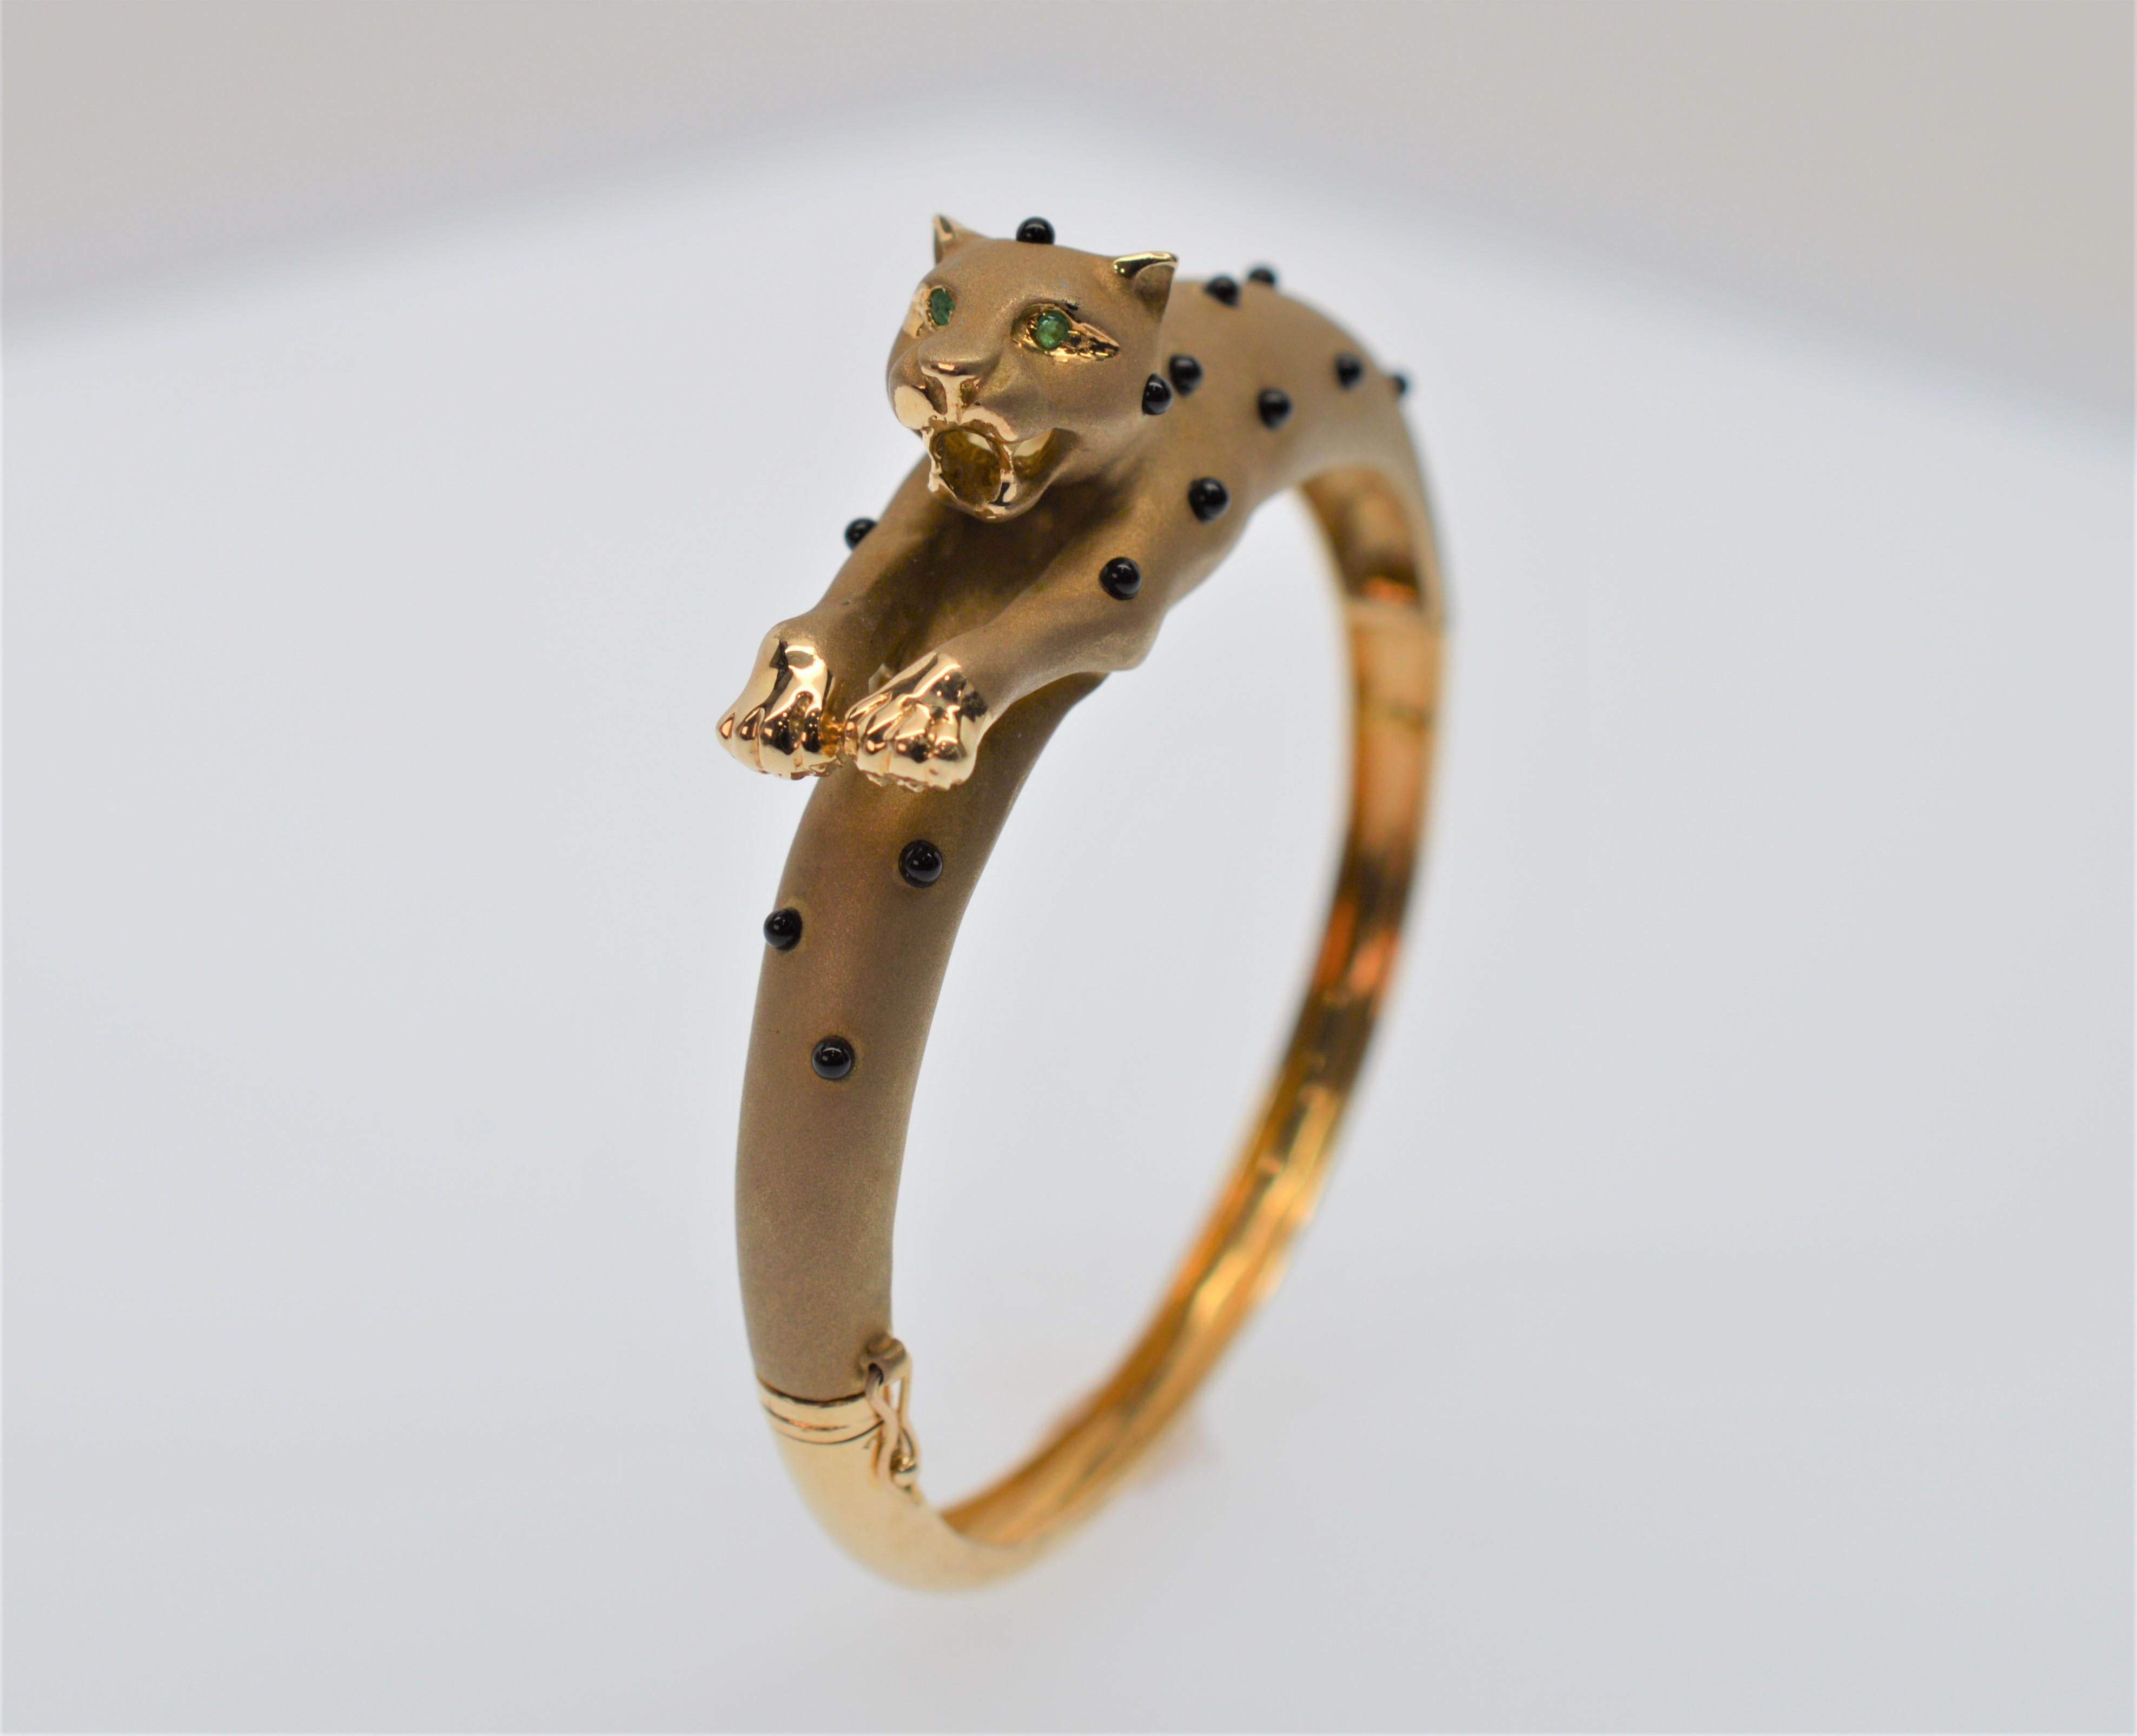 Unique and fun, this fourteen karat (14K) yellow gold leopard takes it all in stride to form this unusual bangle bracelet. Proudly sporting his black onyx spots, this brushed gold big cat is sure to garner attention bearing gold teeth and glaring